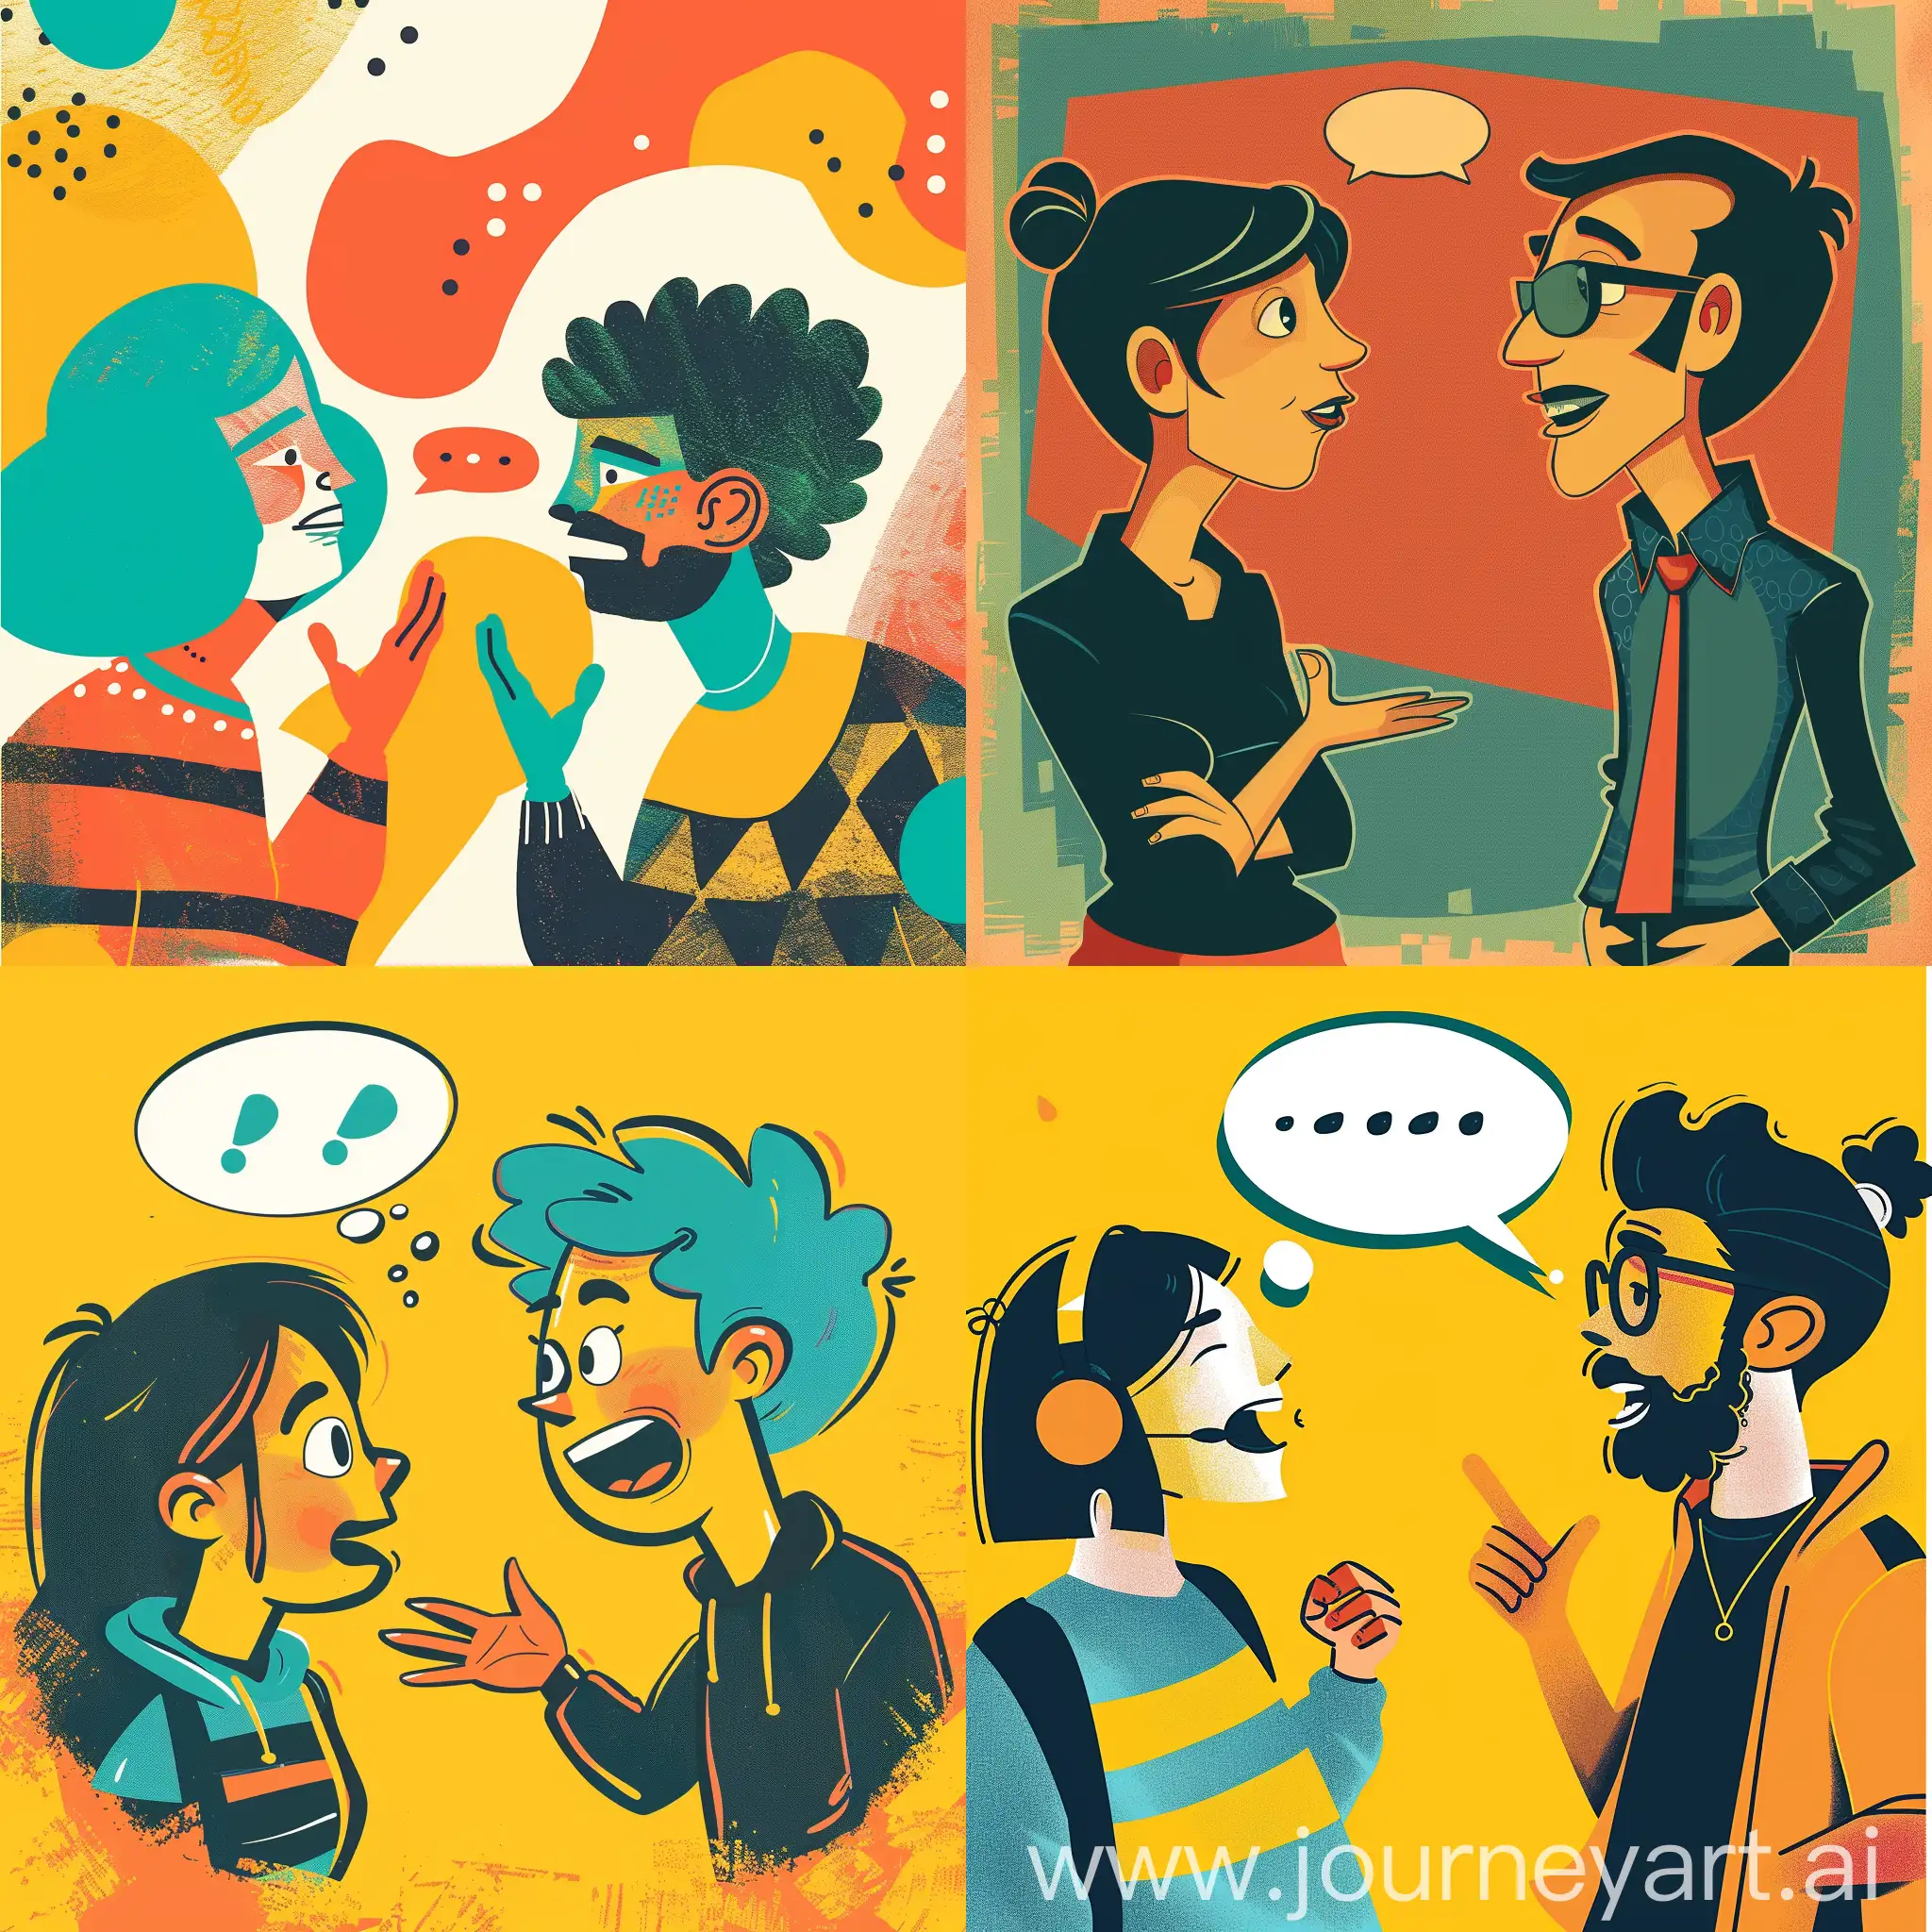 a poster style image of two cartoonish people in a conversation